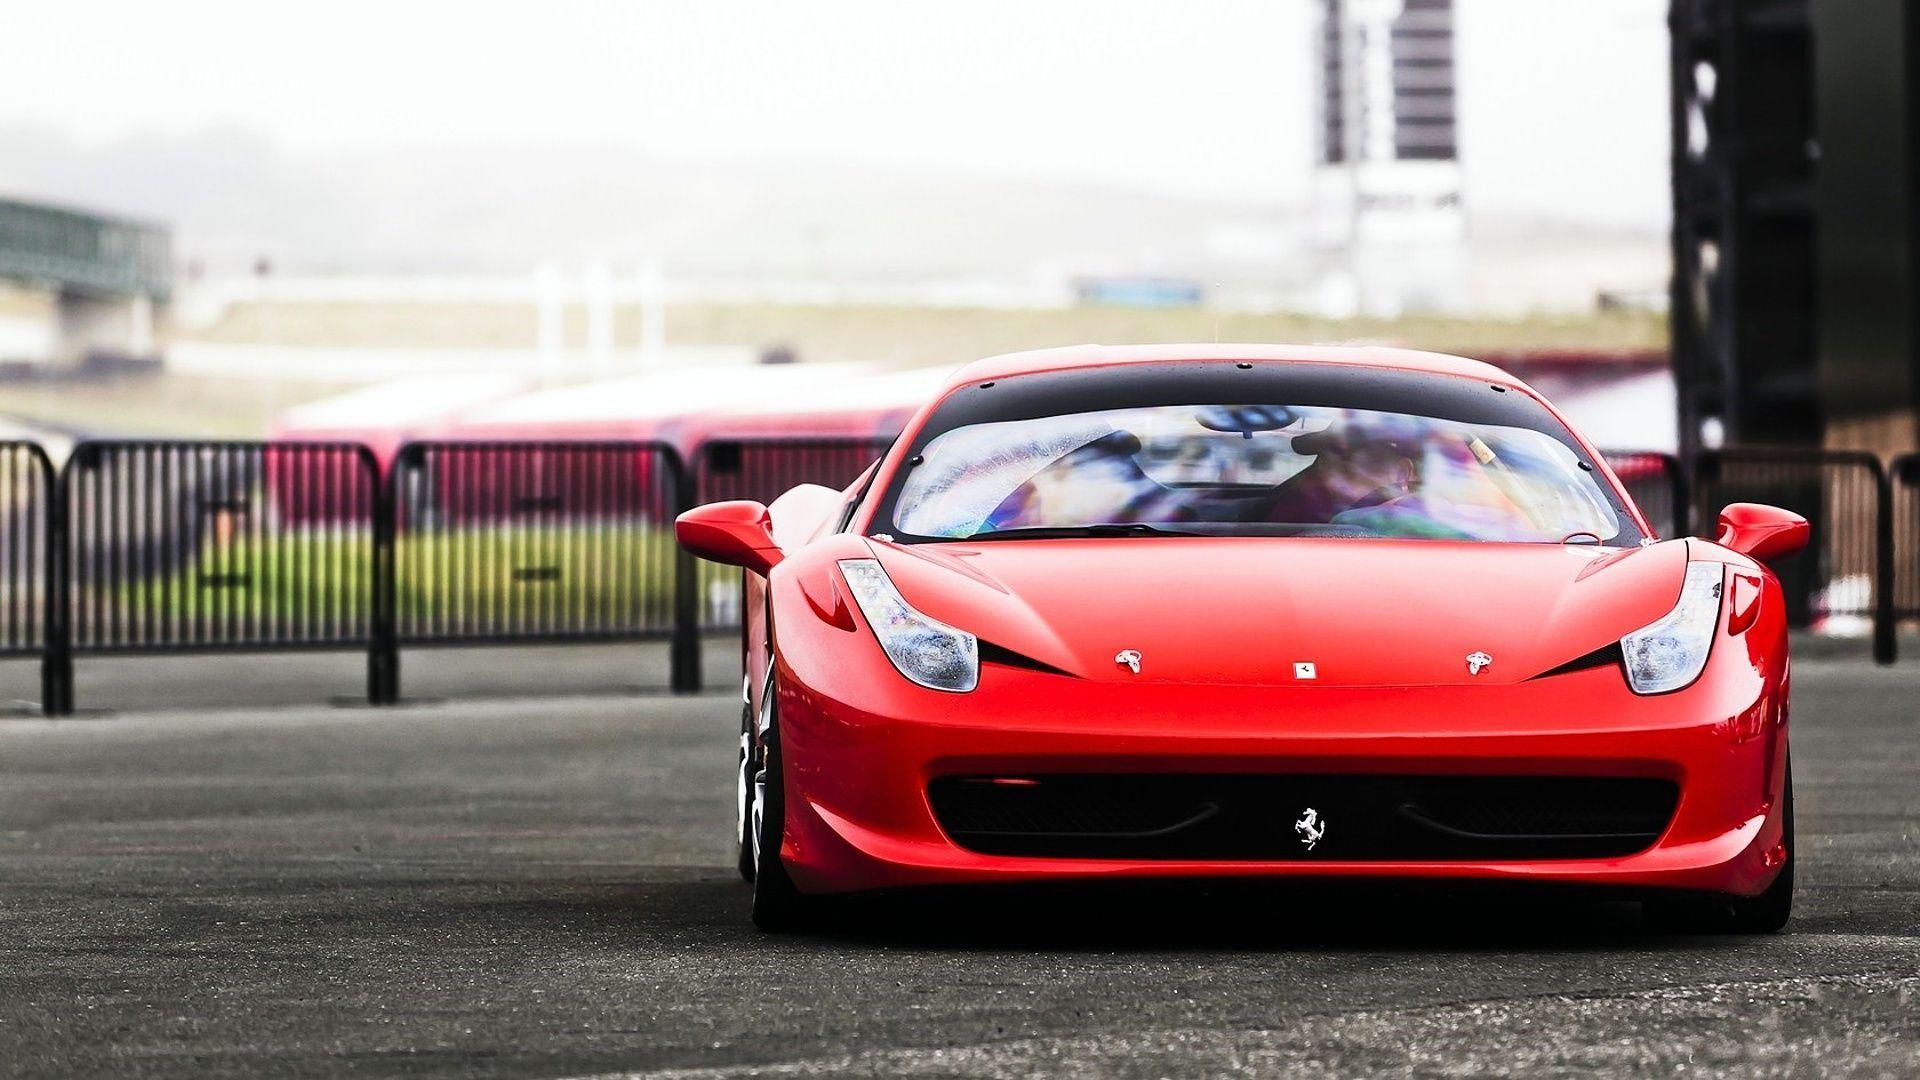 Coolest Collection of Ferrari Wallpaper Background In HD. HD